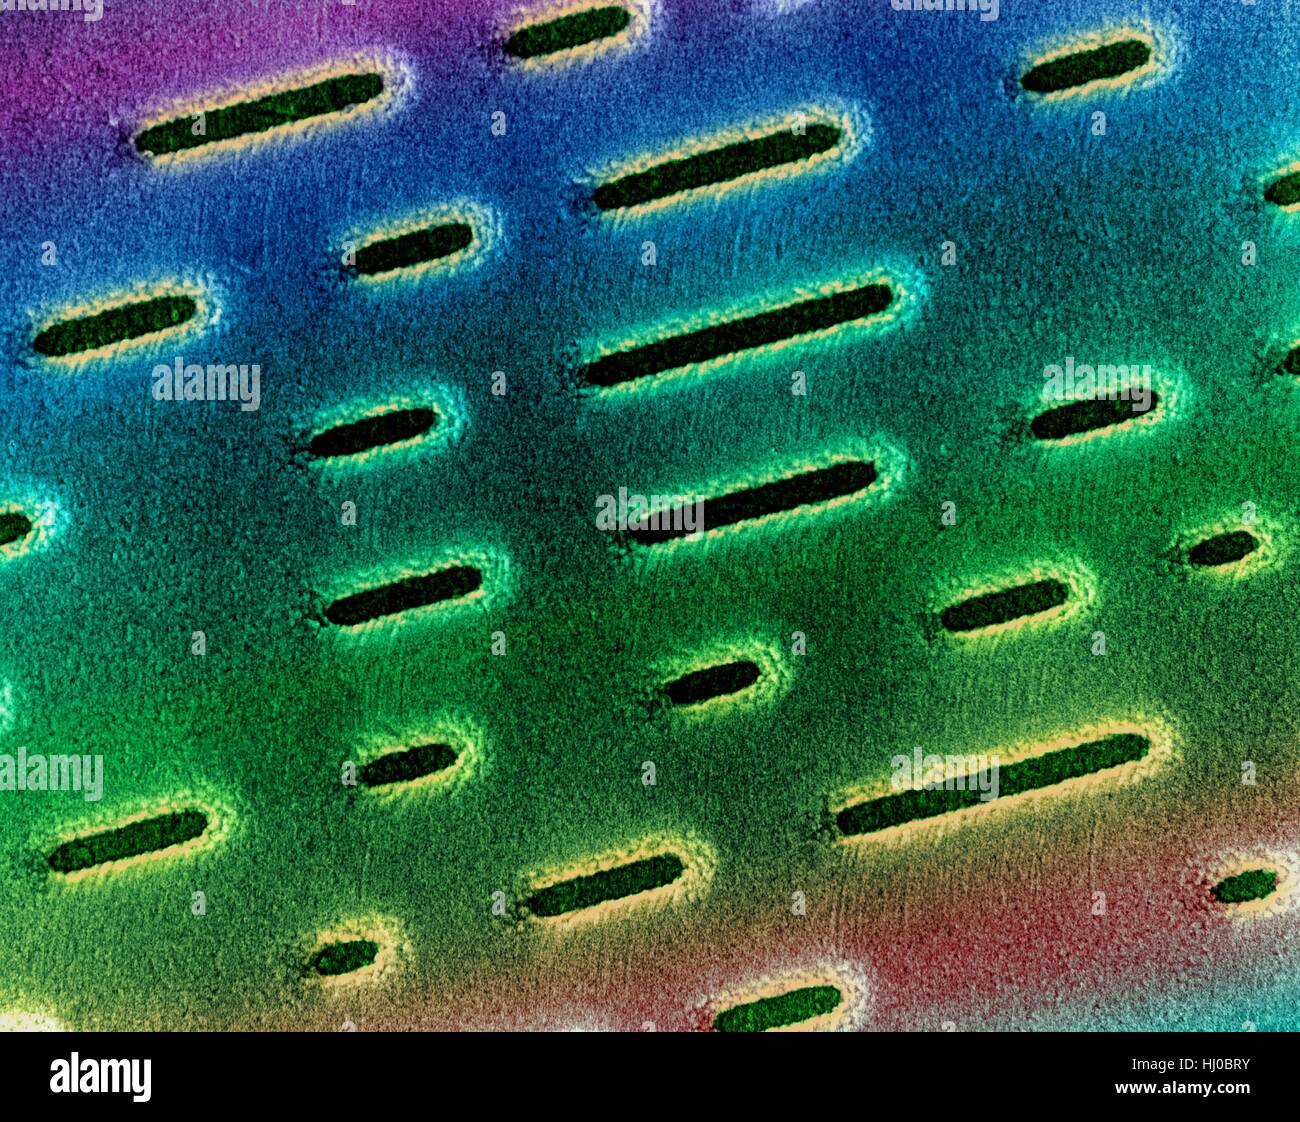 Coloured scanning electron micrograph (SEM) of Compact disc surface (CD, CD-ROM).  A CD is a plastic disc that is etched or pressed with a series of fine  depressions representing the digitized audio